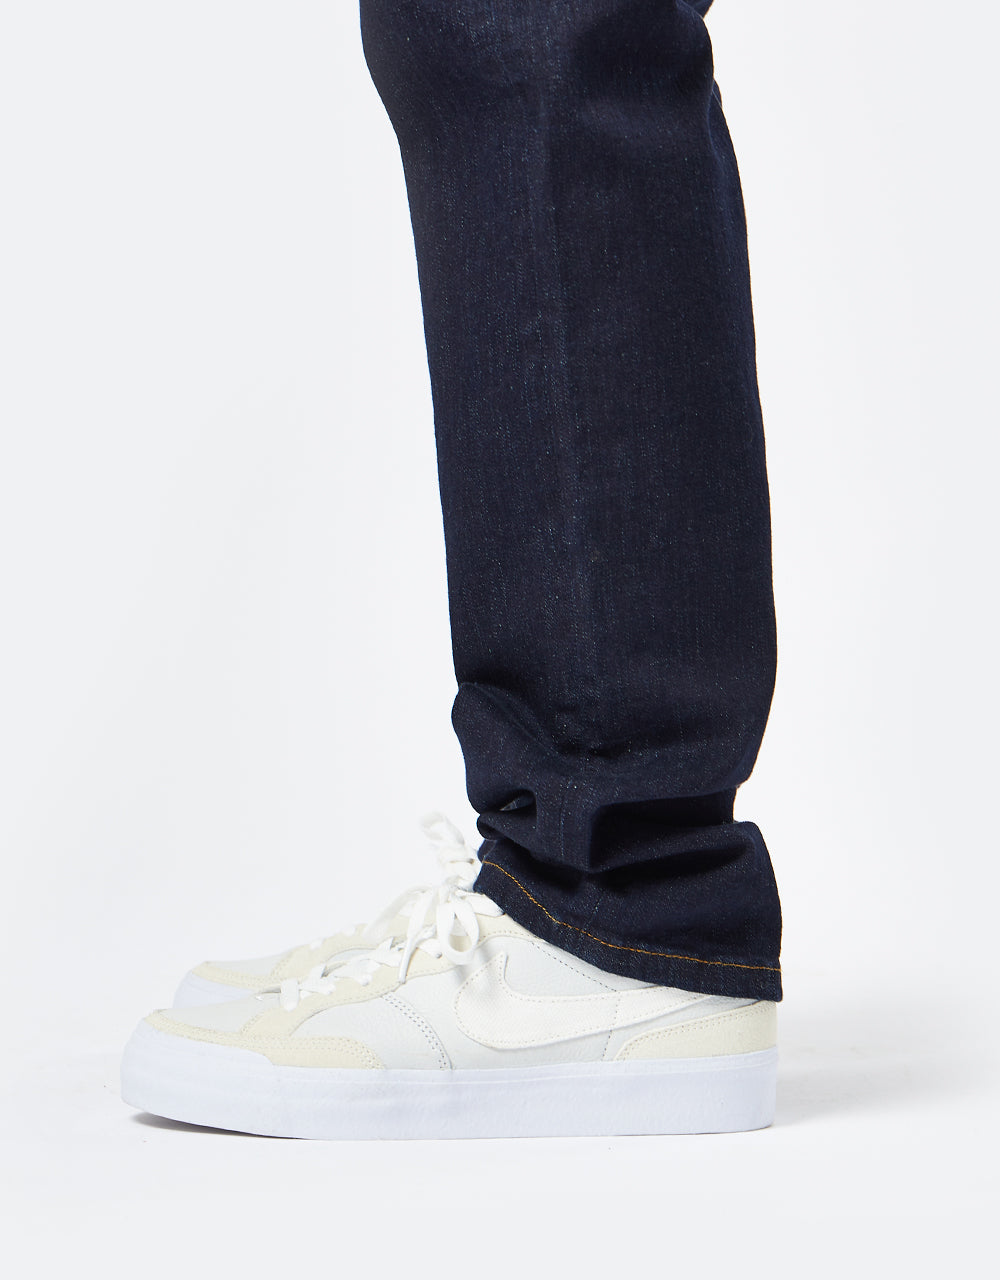 Route One Relaxed Denim Jeans - Raw